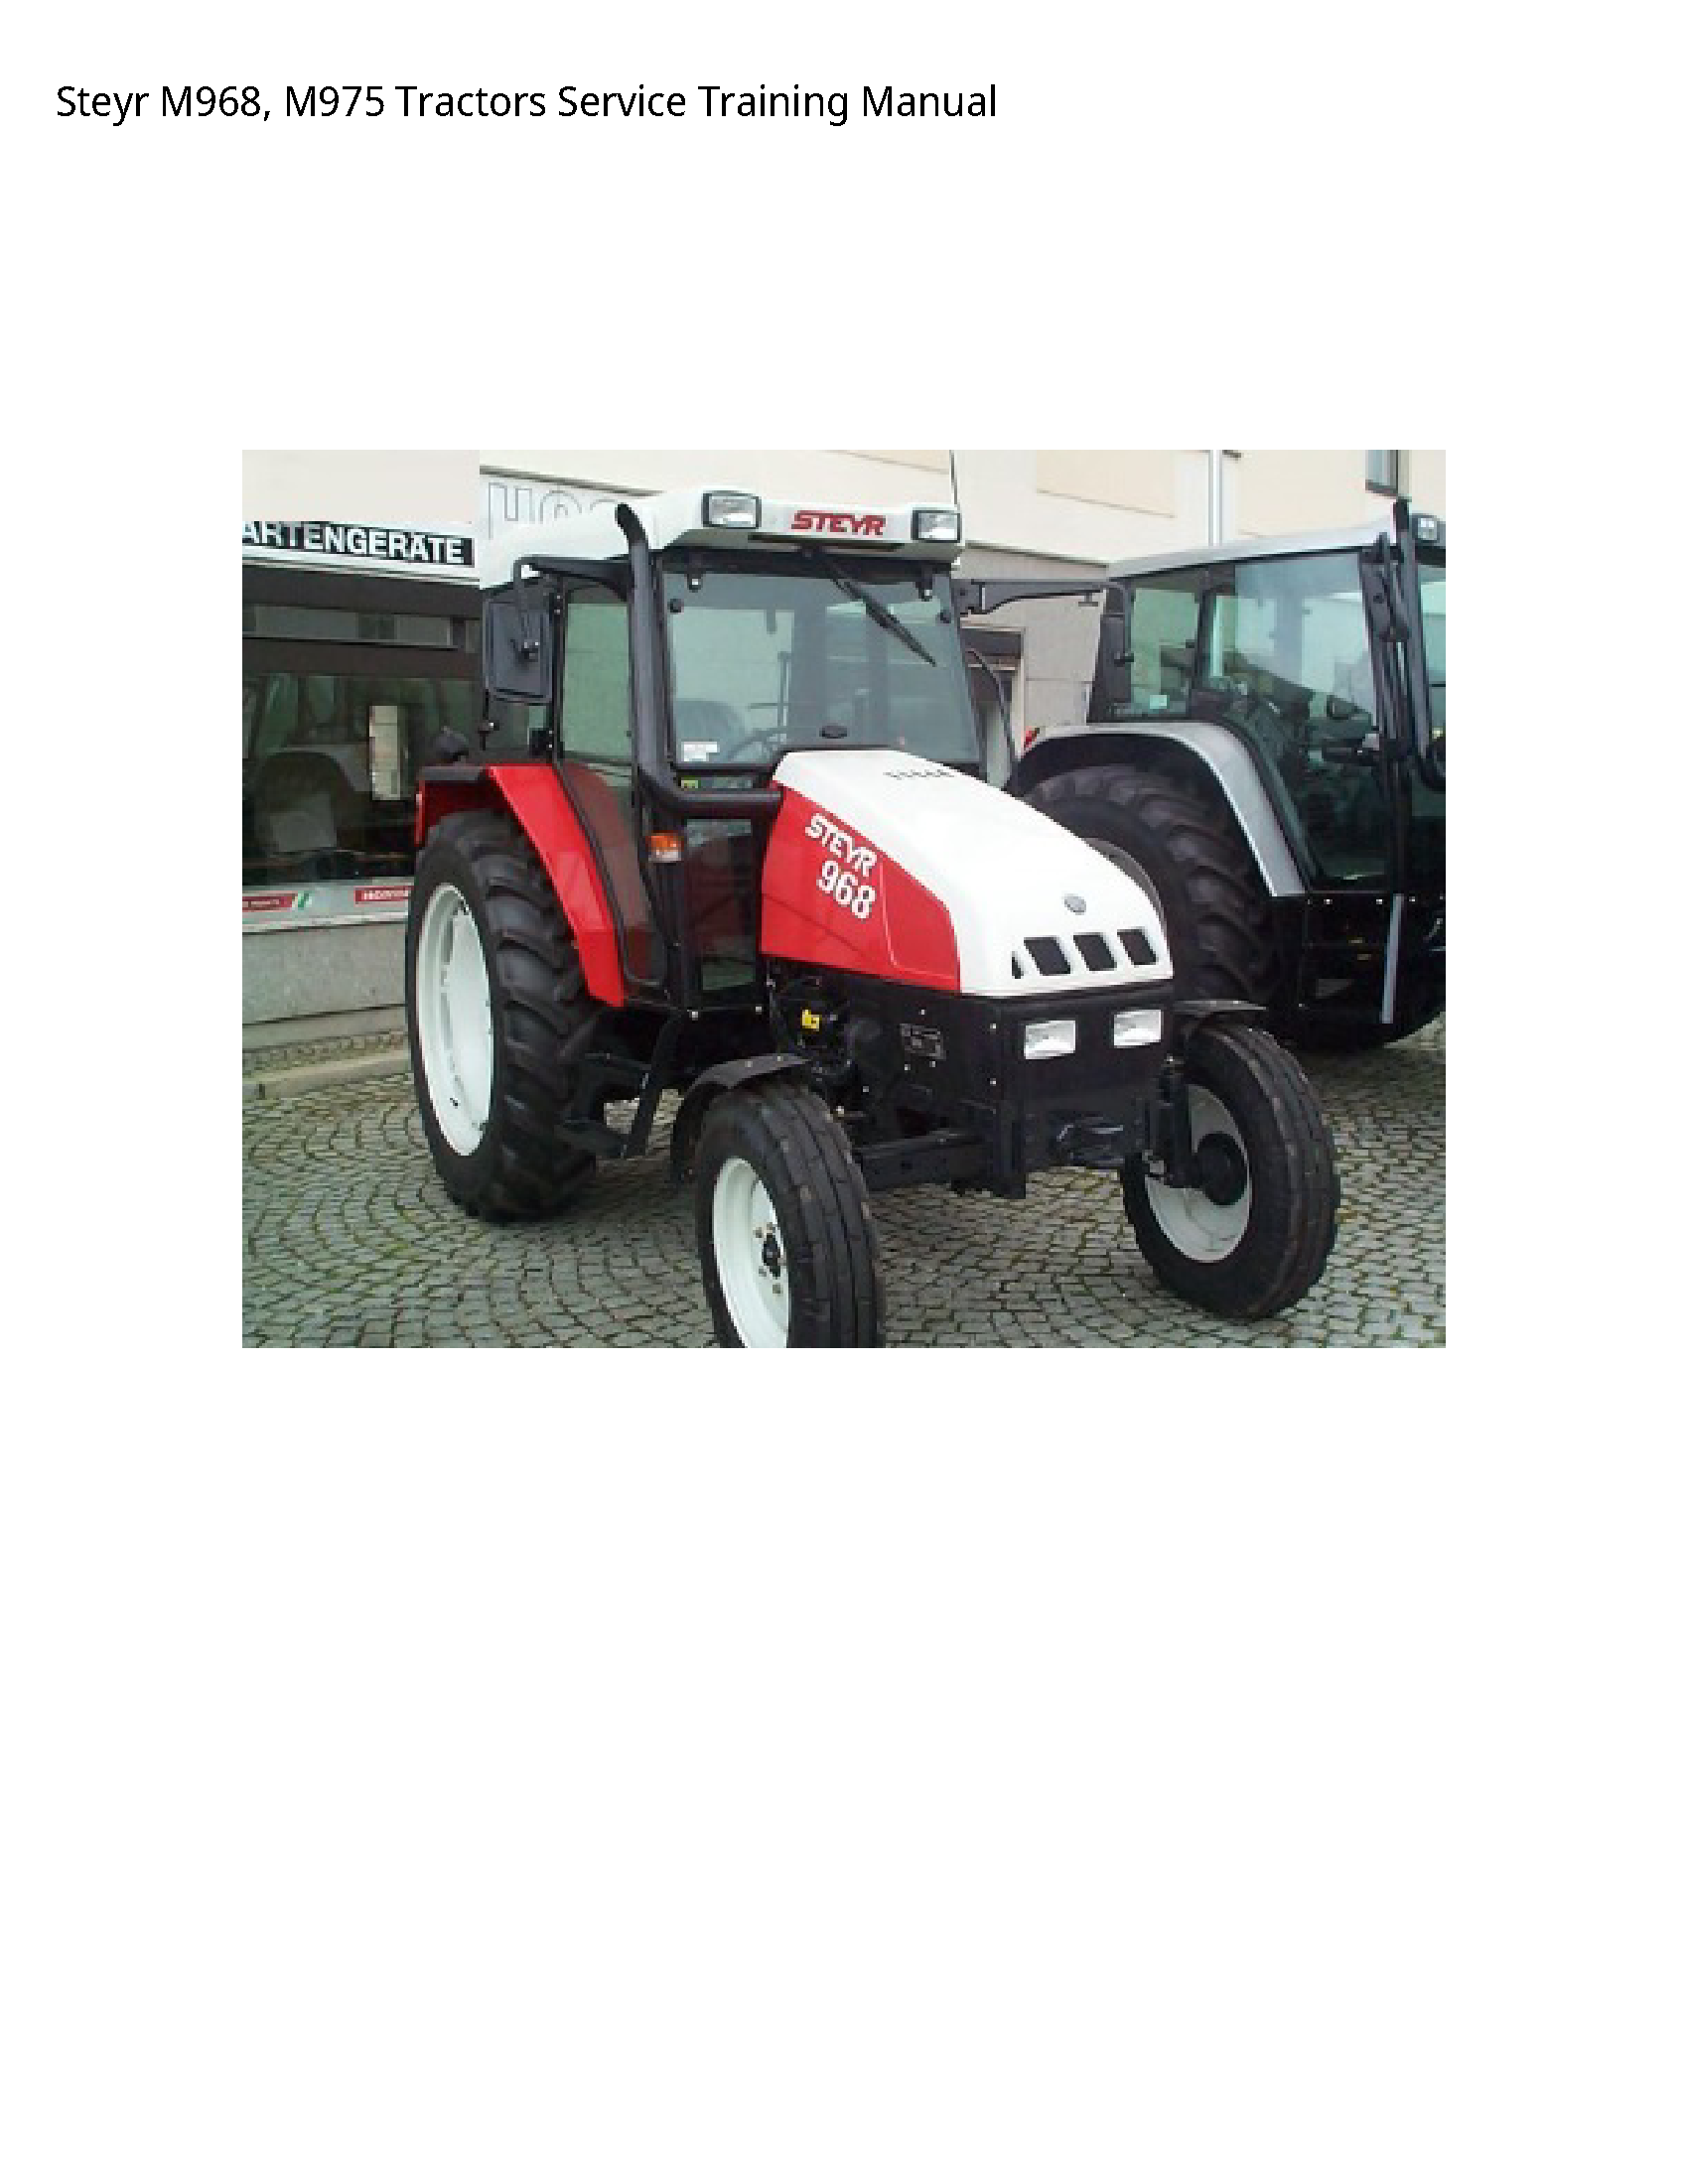 Steyr M968 Tractors Service Training manual